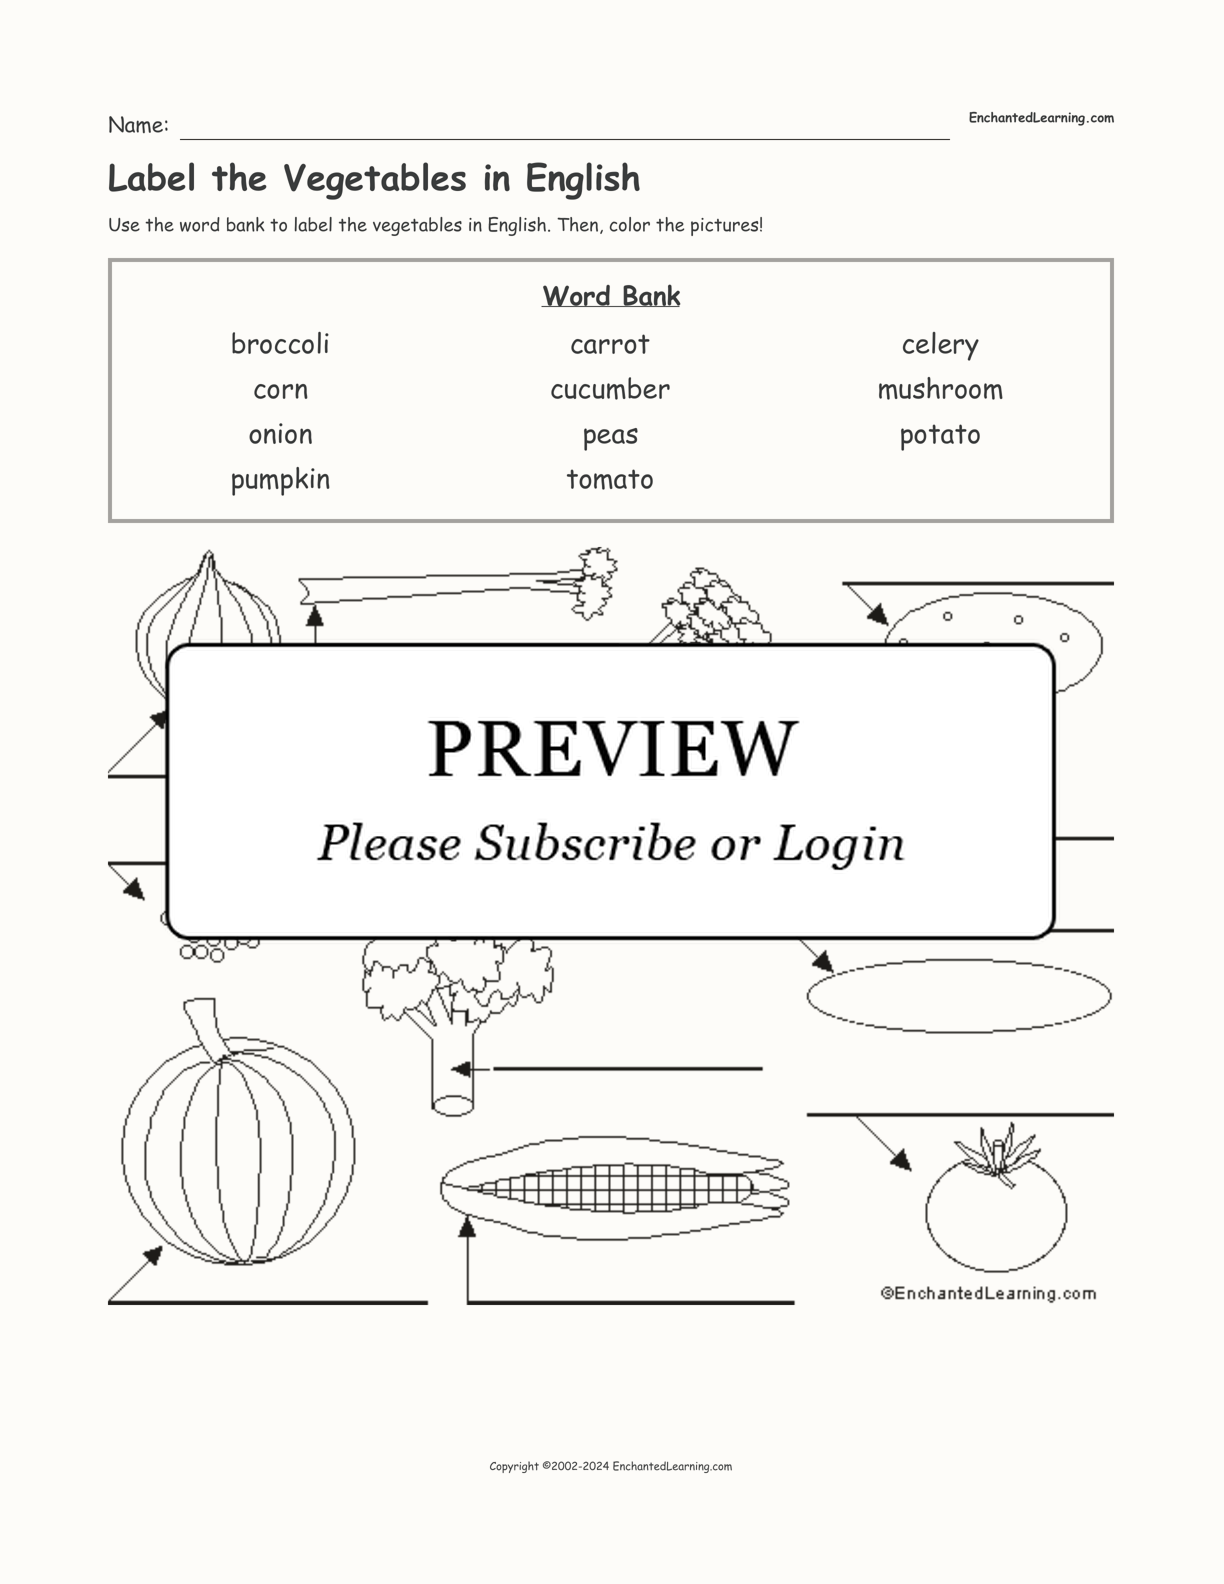 Label the Vegetables in English interactive worksheet page 1